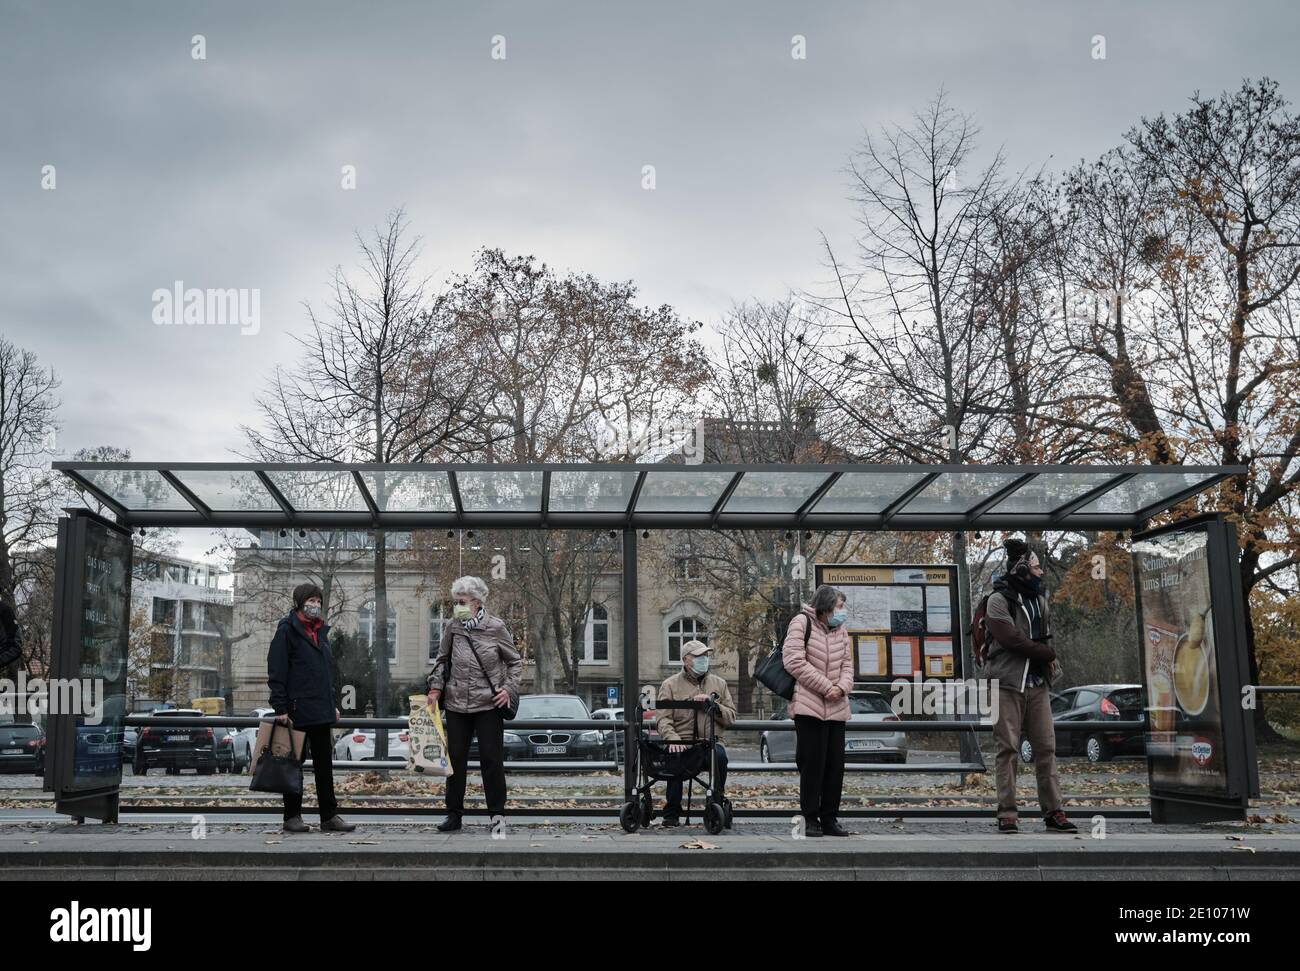 People waiting at a bus station, face coverd with a mask, Dresden, Germany - 11.17.2020 Stock Photo